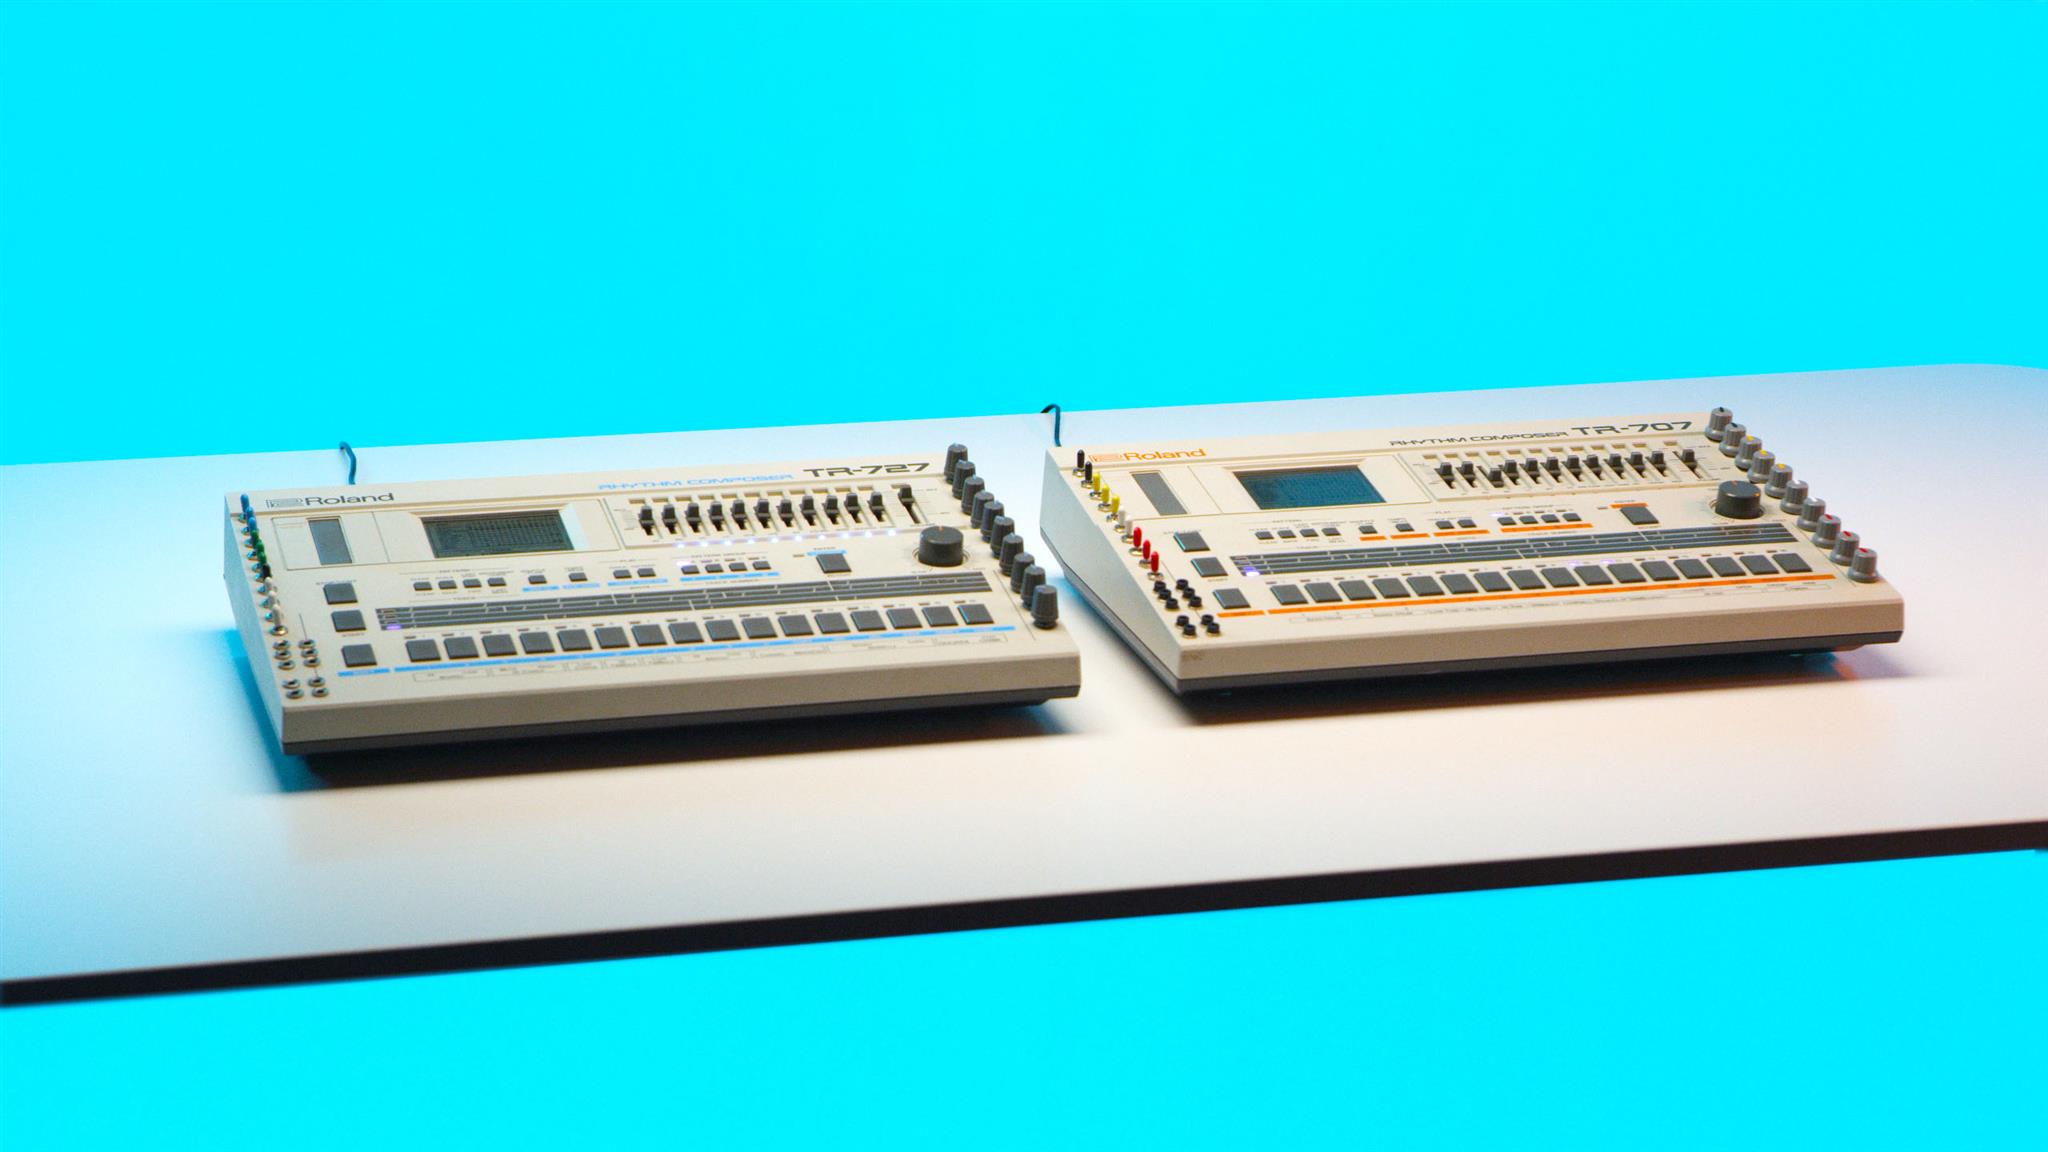 Mod Squad: A History of TR-707 and TR-727 Modifications